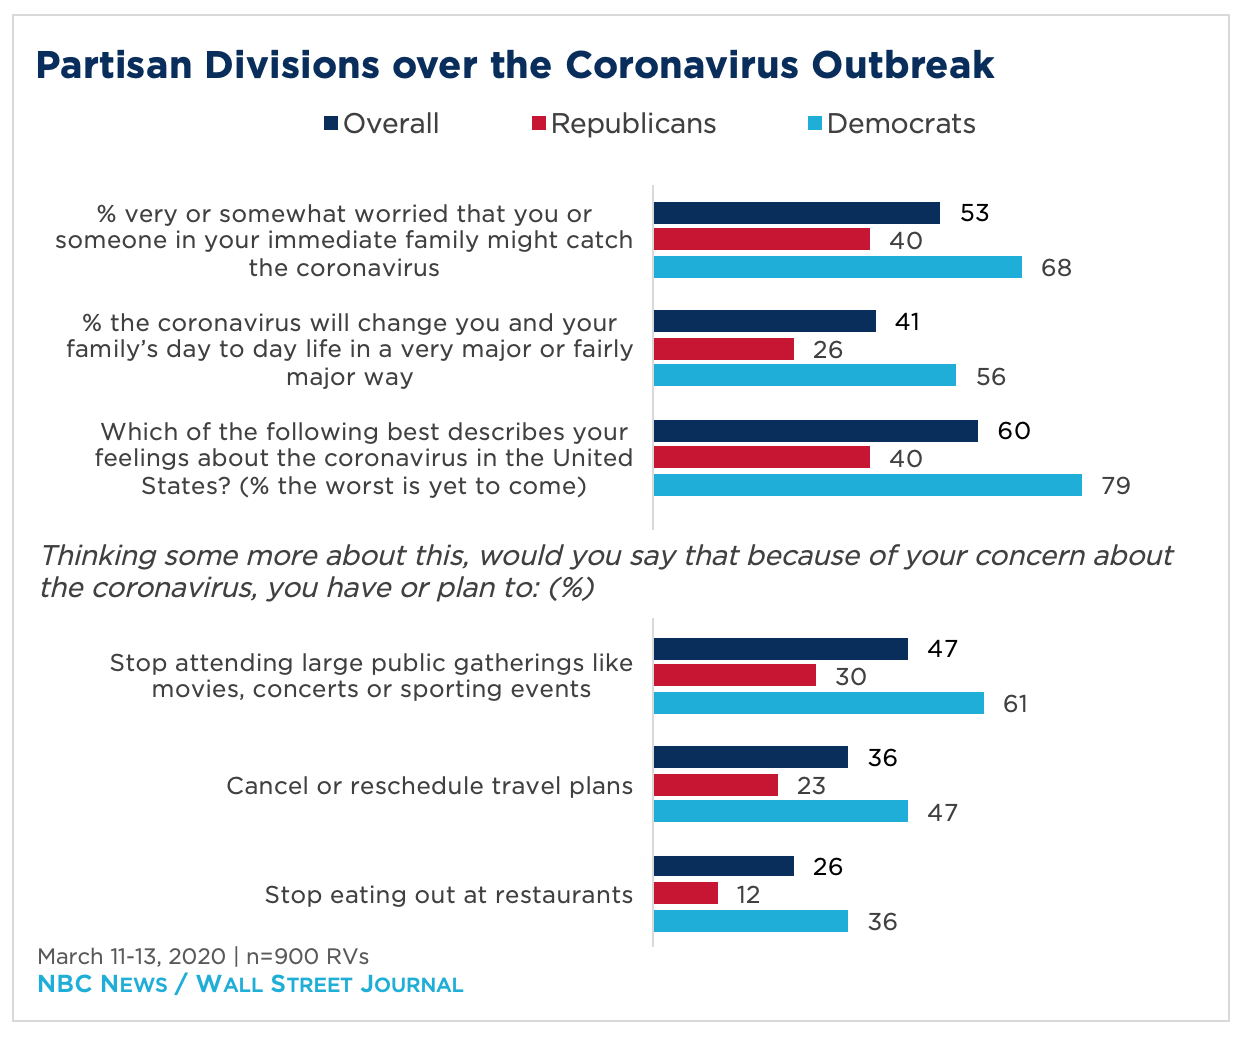 Bar chart showing partisan divisions over the coronavirus outbreak